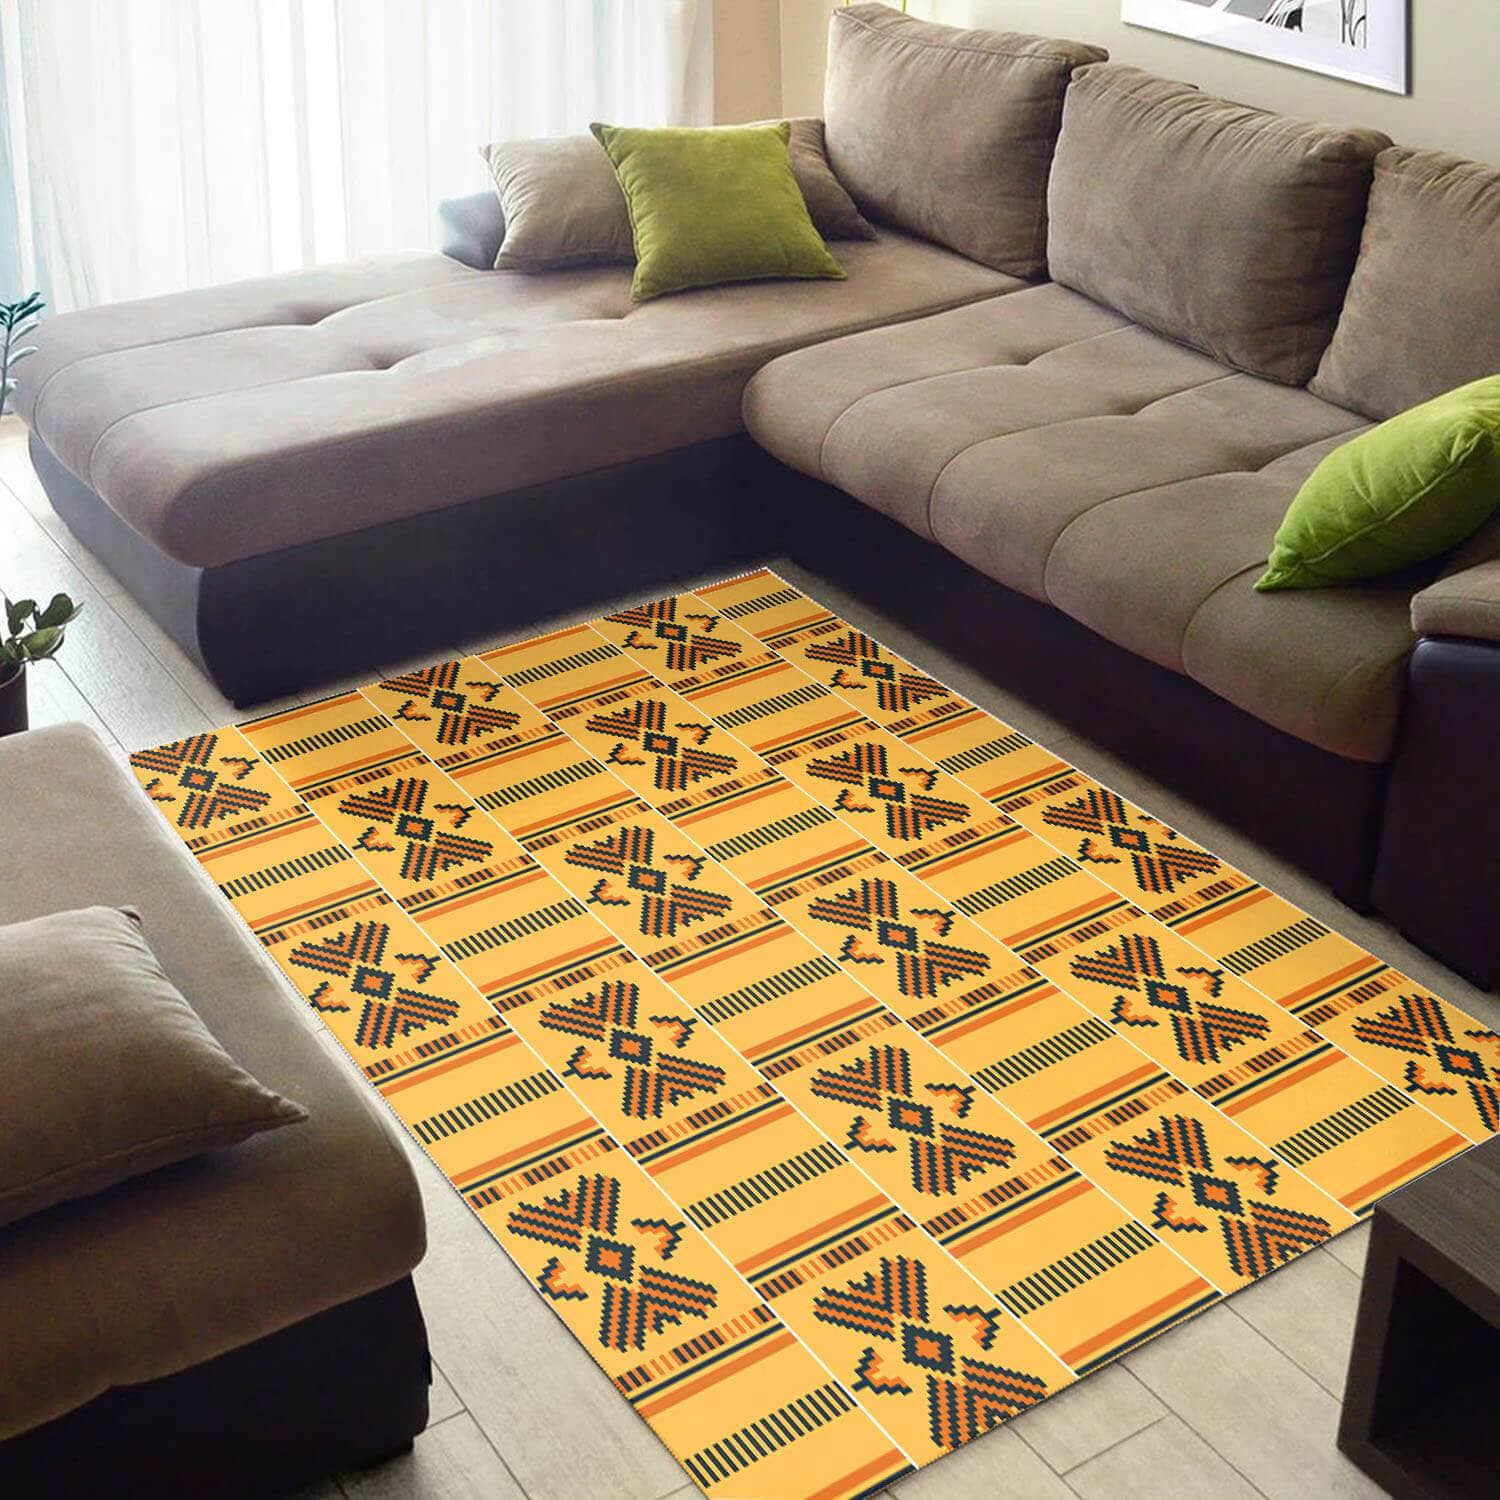 Beautiful African Awesome Afrocentric Ethnic Seamless Pattern Design Floor Carpet Inspired Home Rug